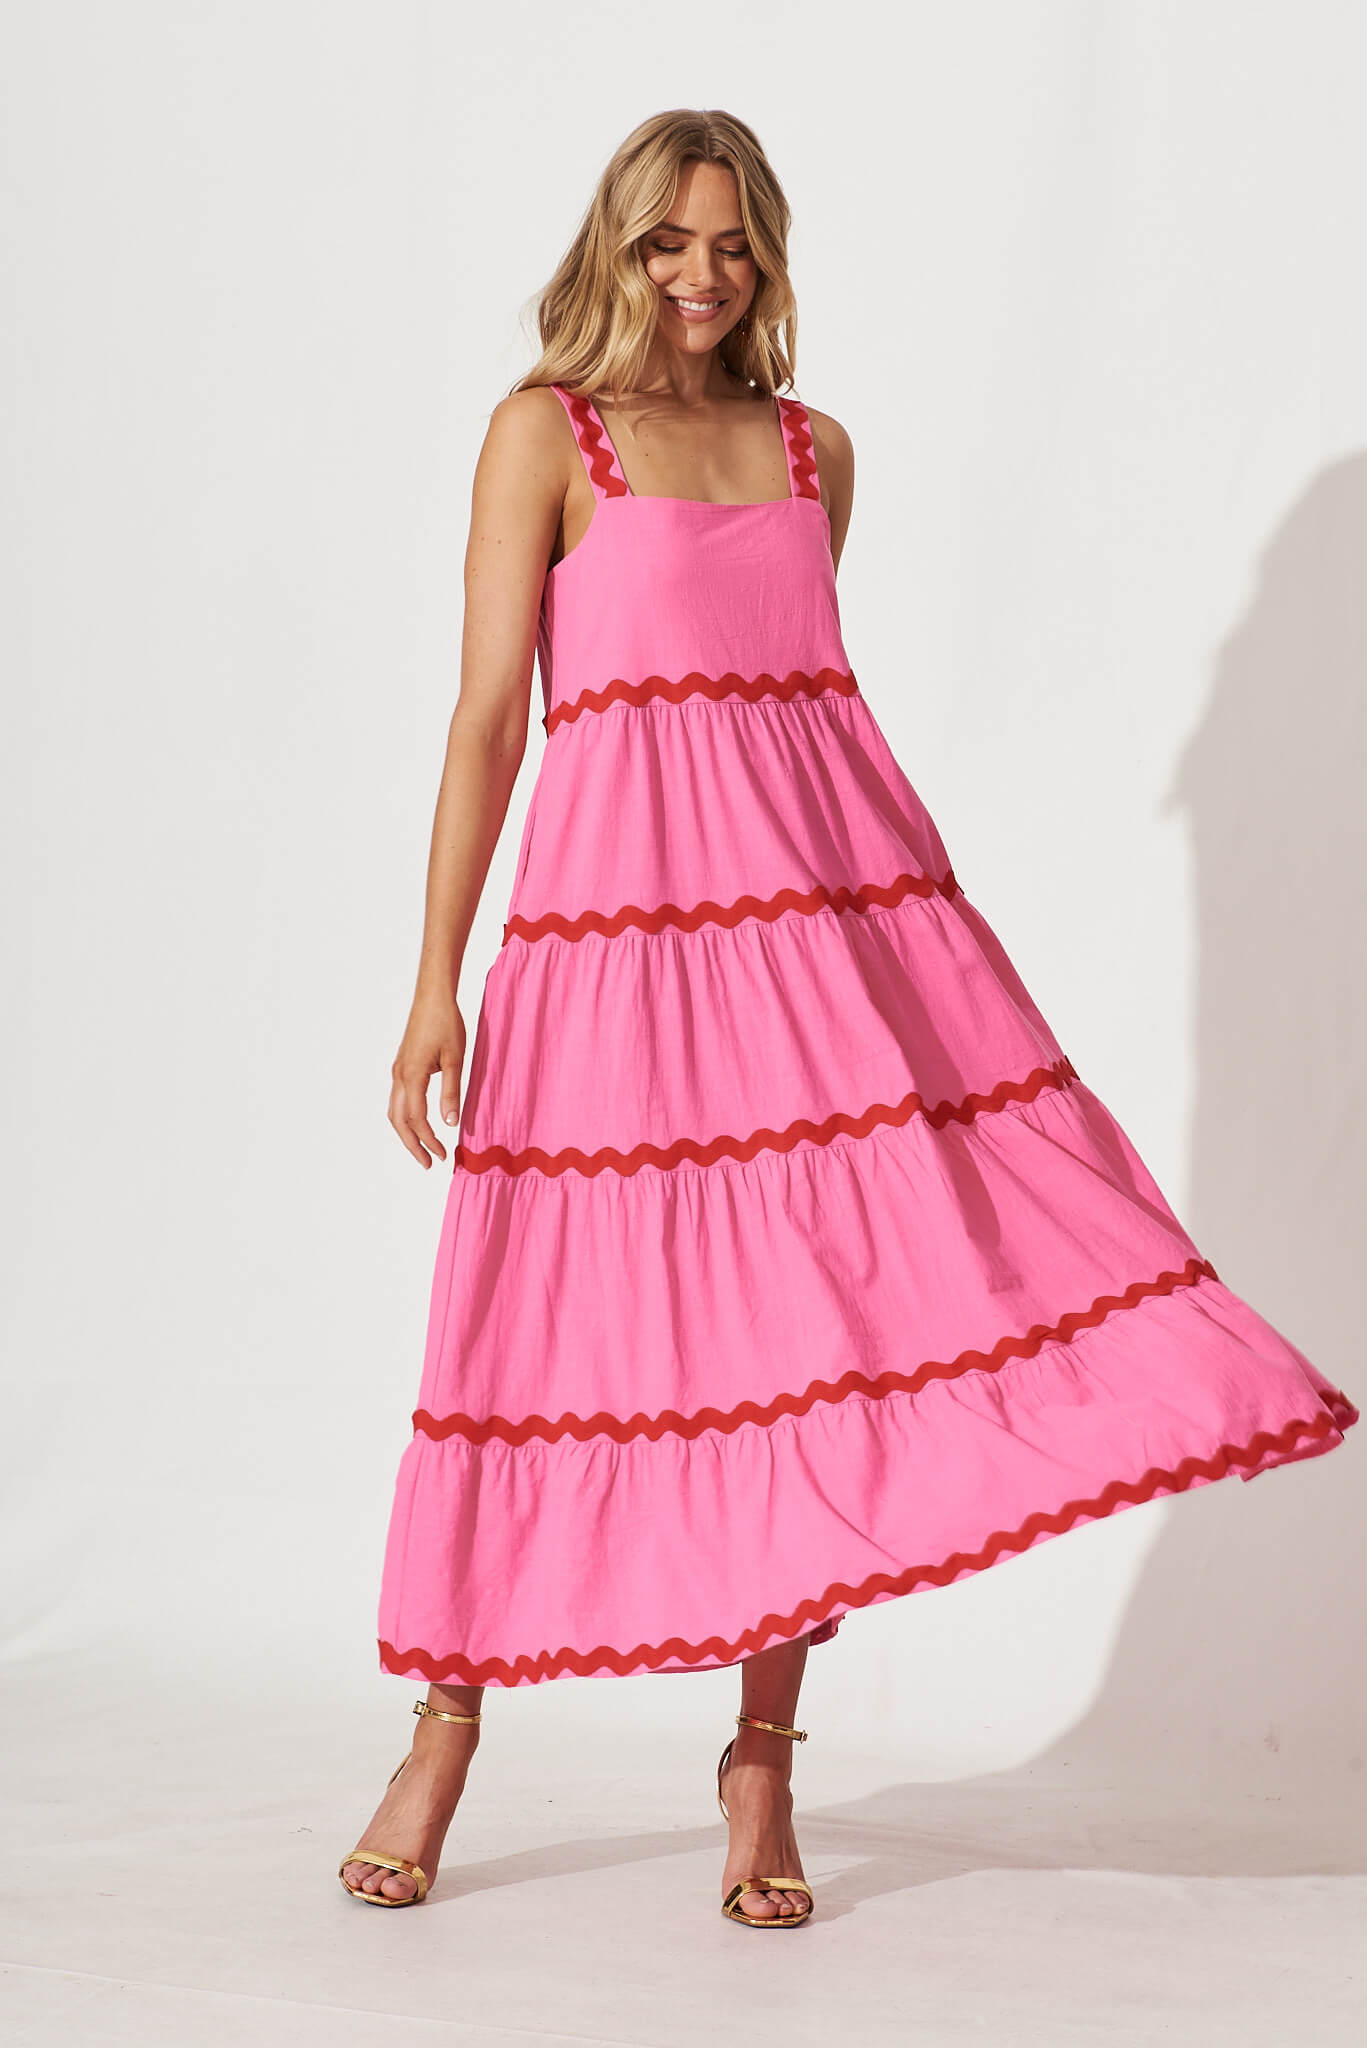 Chantal Maxi Dress In Pink With Red Ric Rac Trim Cotton - full length